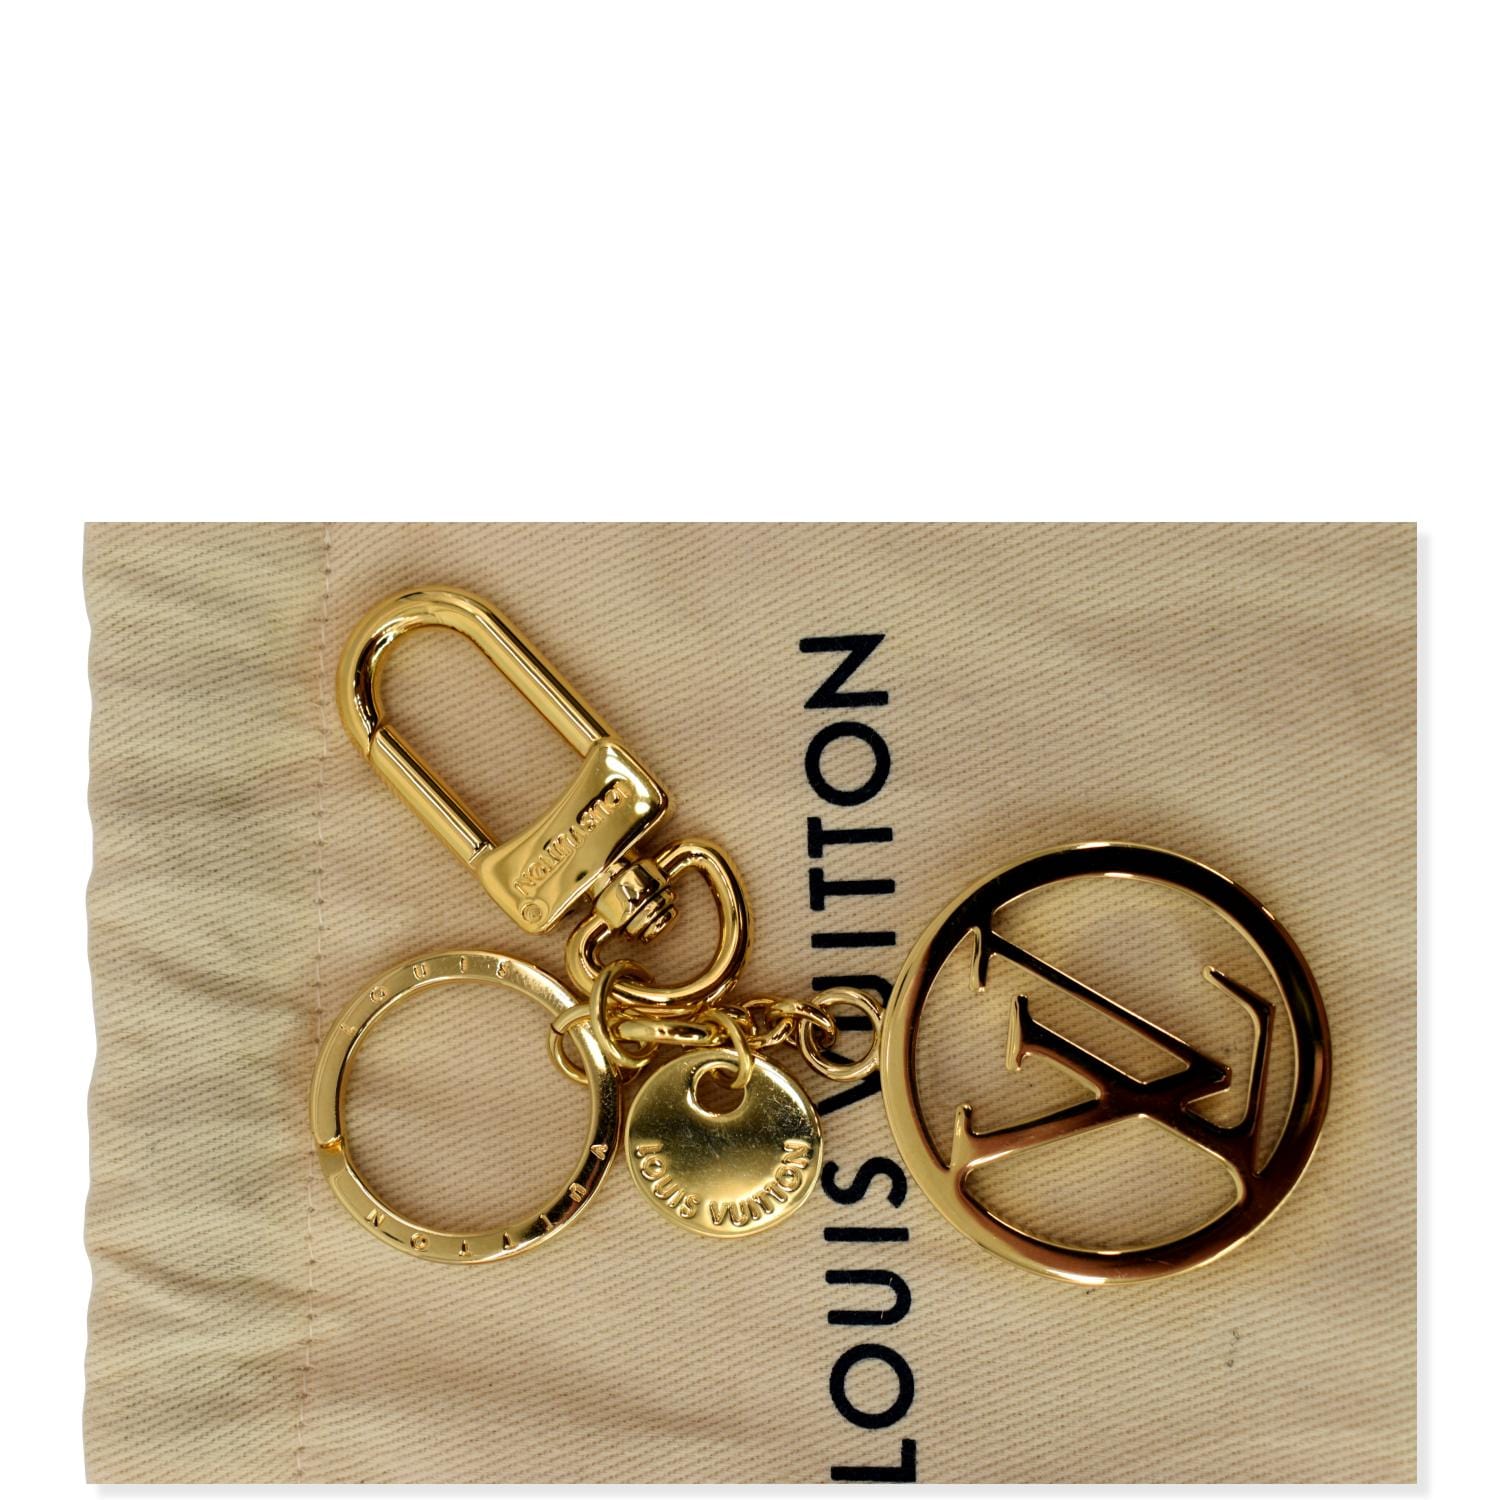 Louis Vuitton Date Code Factory chart for bagcharms, key holders